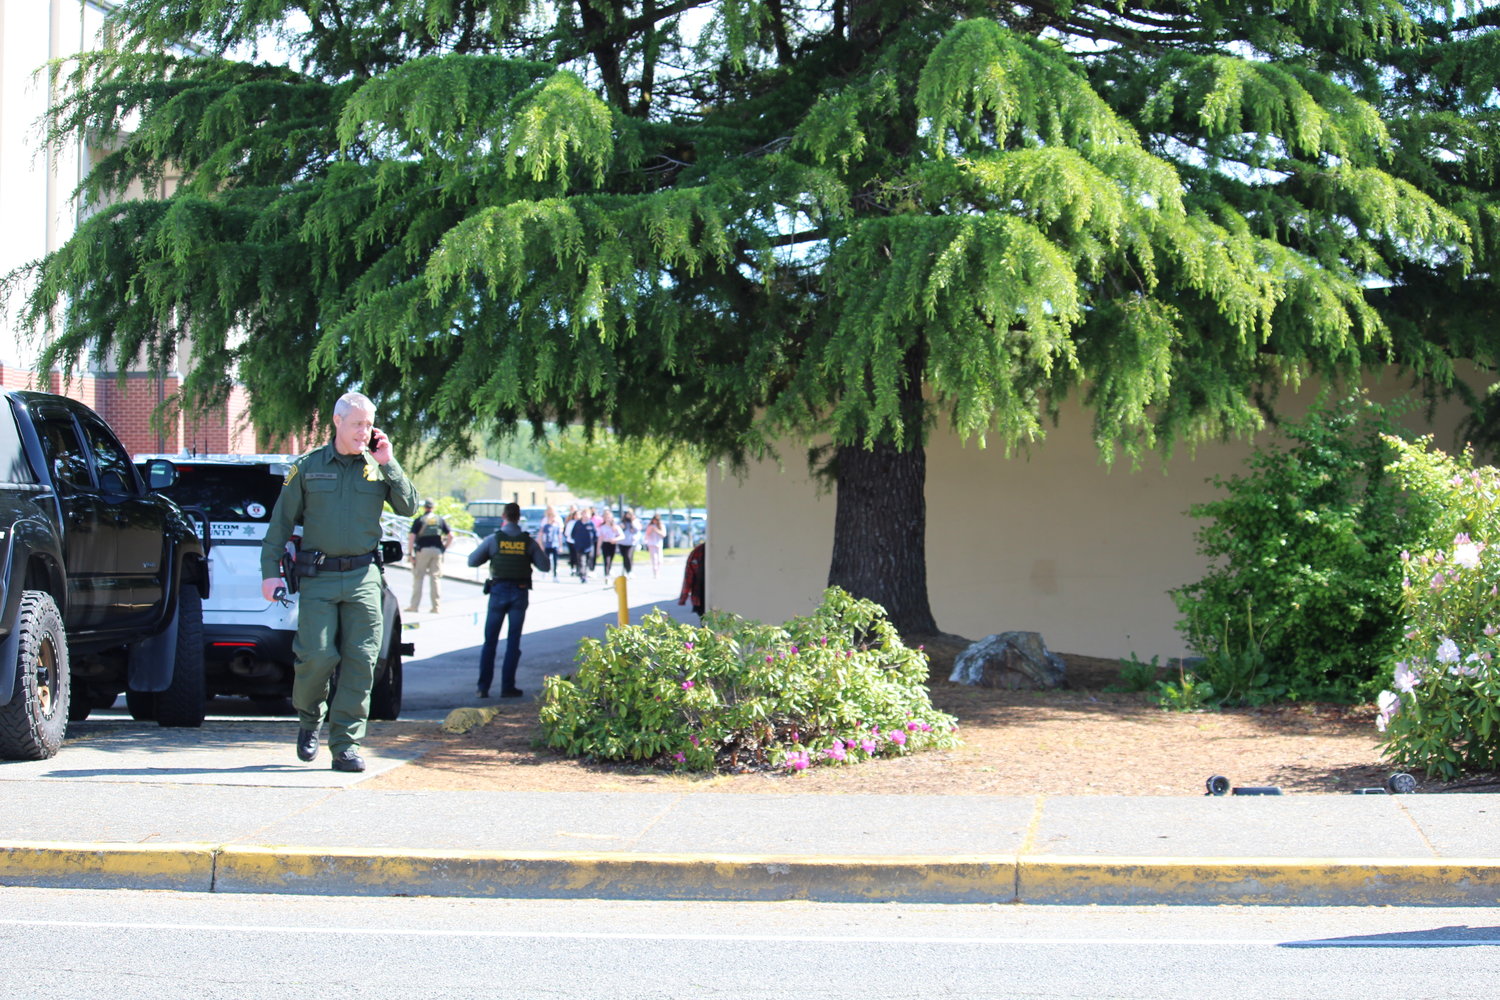 A U.S. Border Patrol agent outside Blaine school district's main campus on May 25.